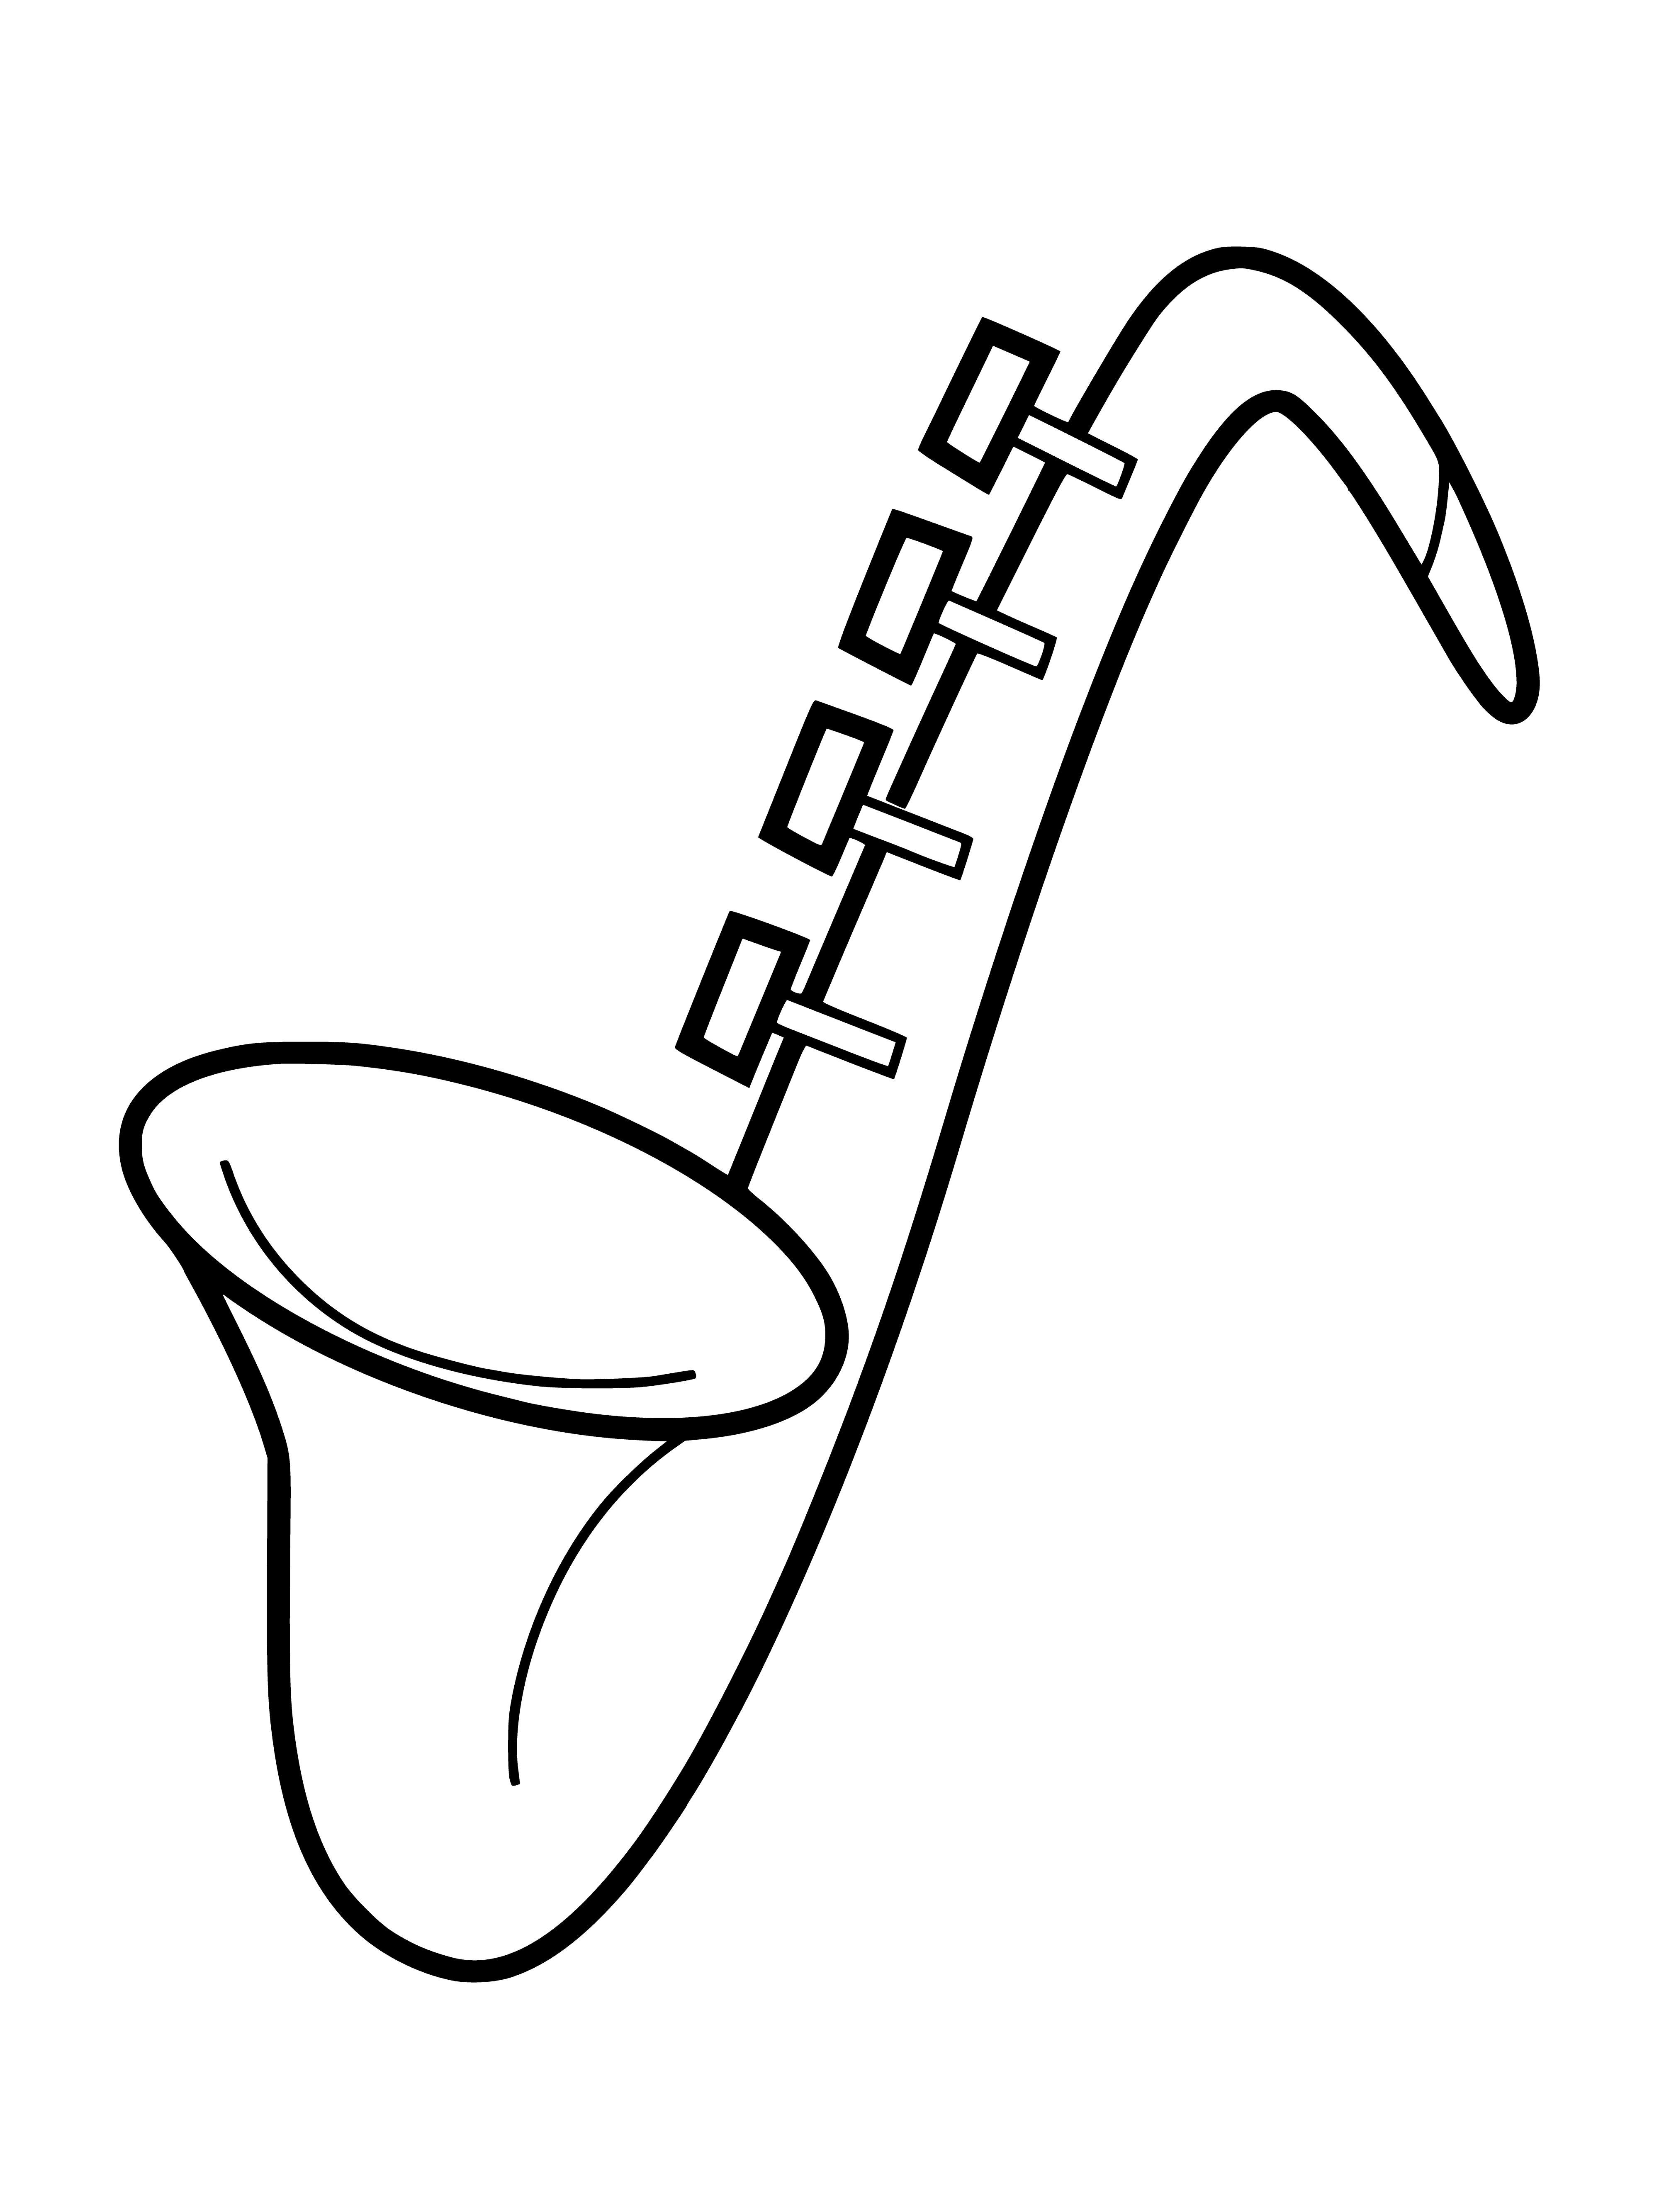 coloring page: Gold tube-like instrument with thin reed attached. Blow into mouthpiece, press keys to create notes.